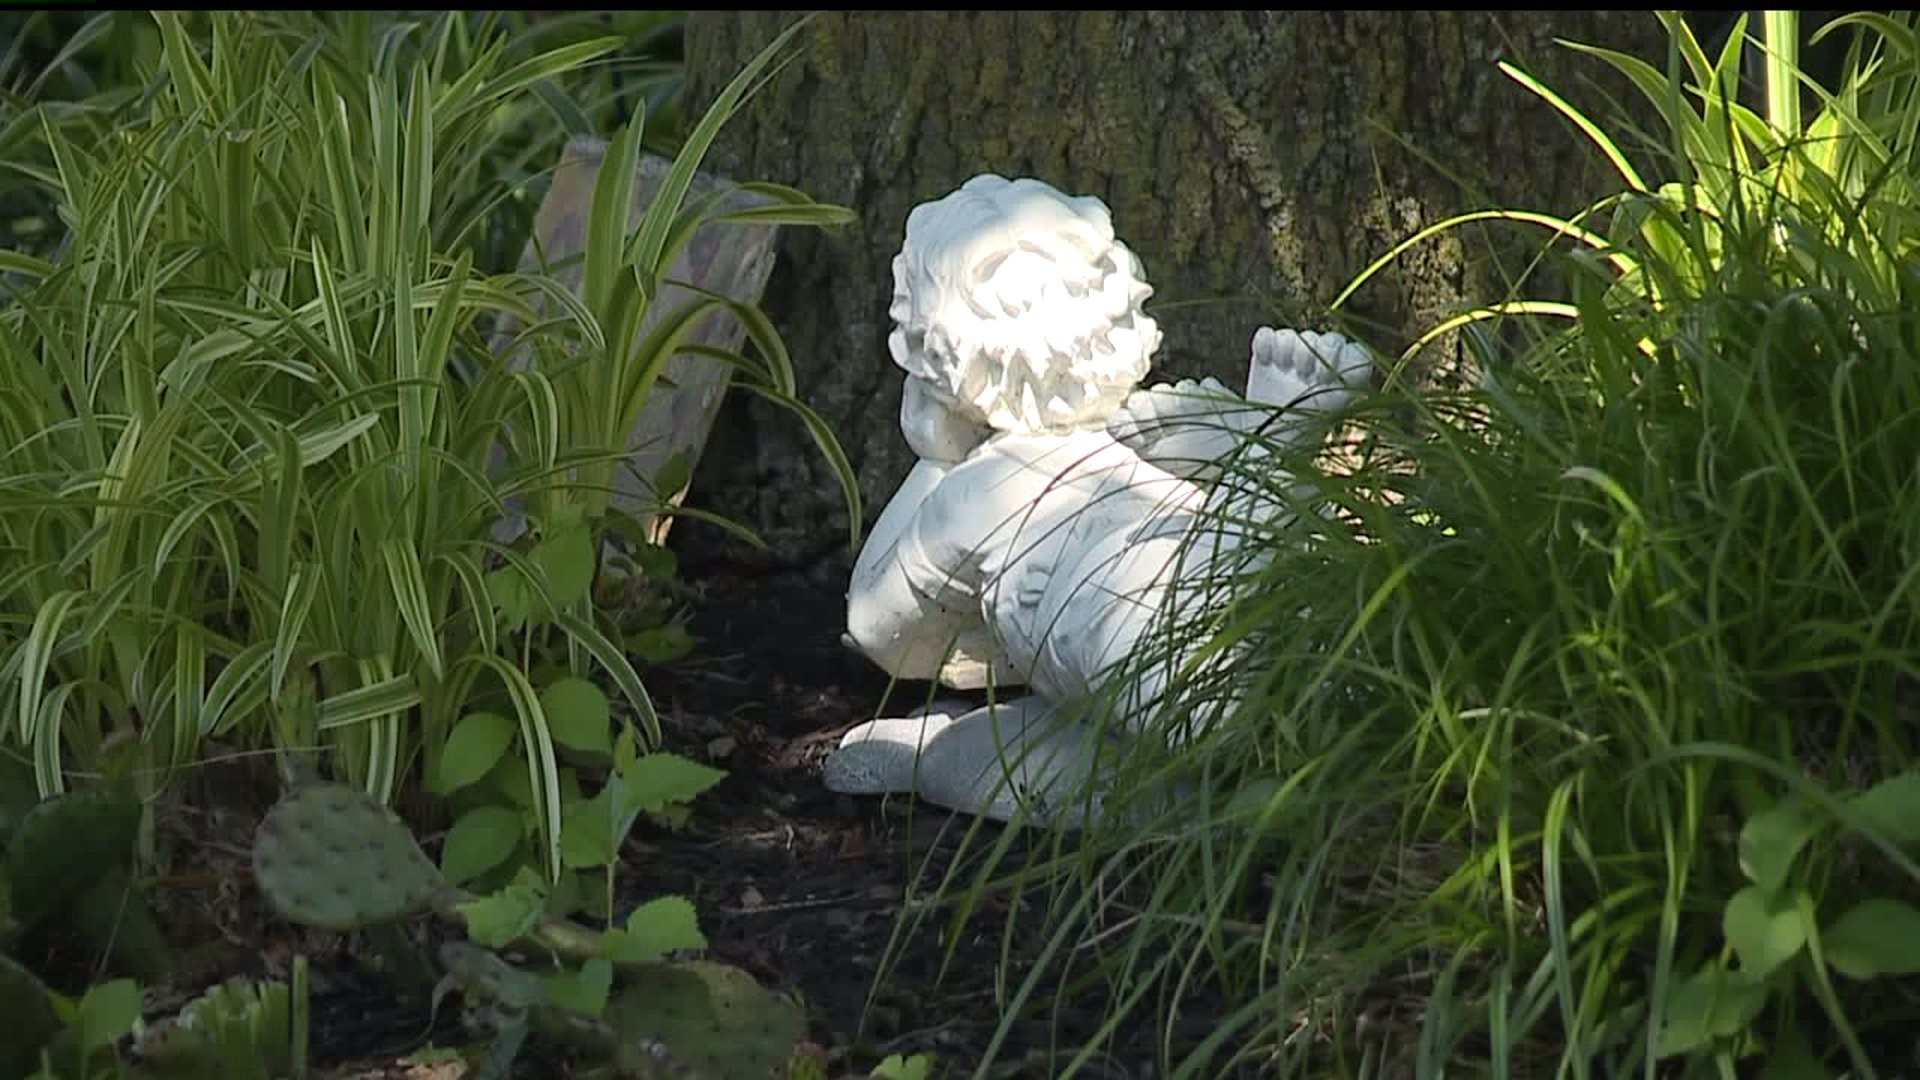 Police: Dozens of lawn decorations stolen in Springettsbury Township